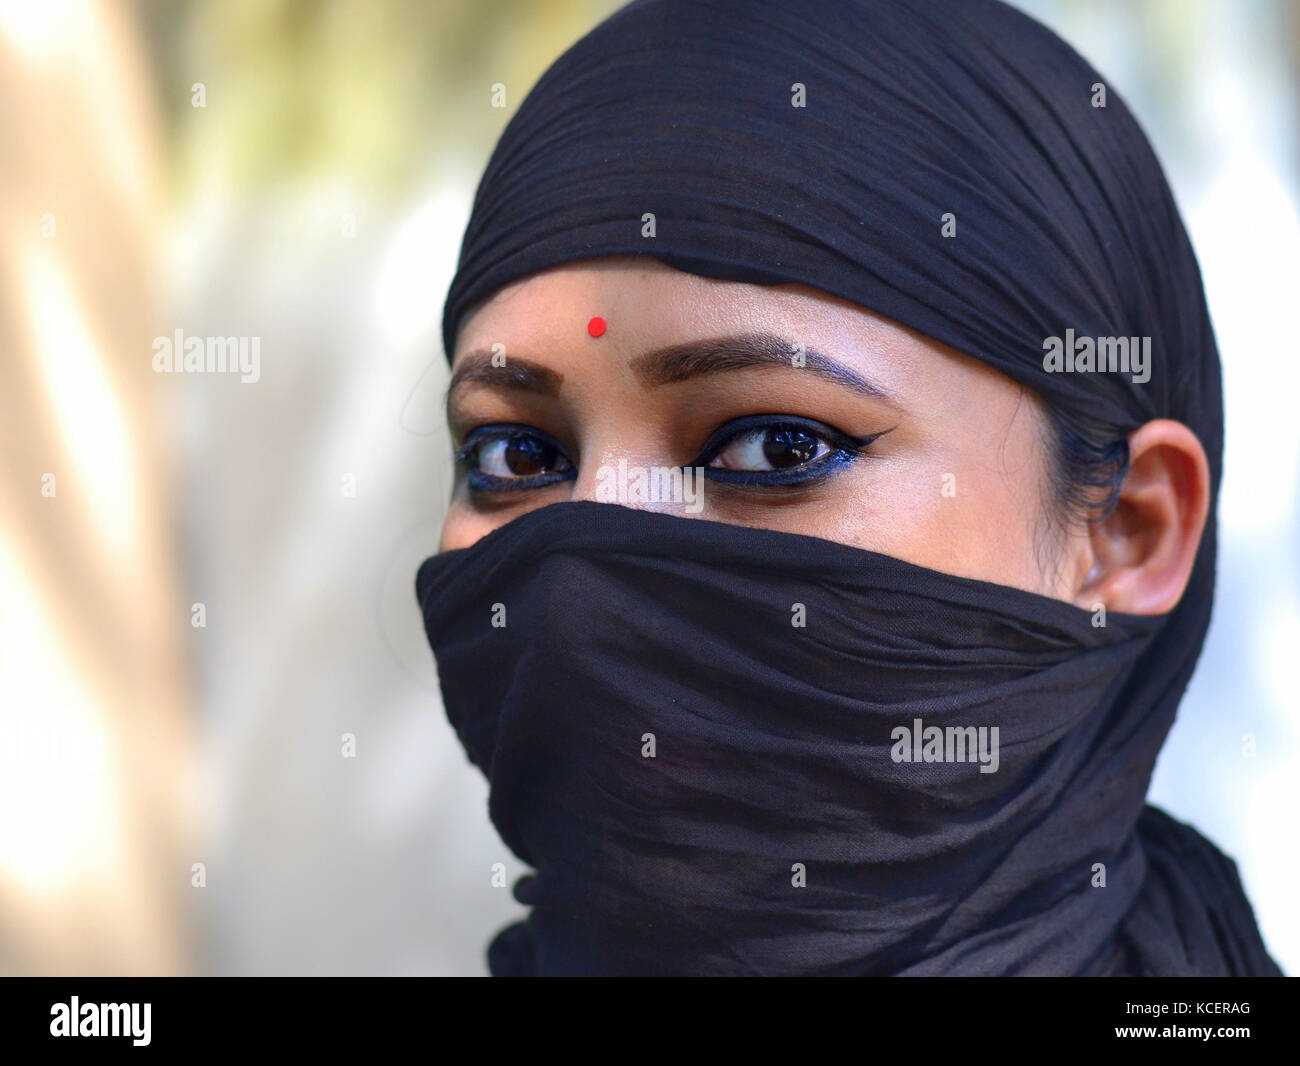 Three-quarter view of a young Assamese Hindu beauty with almond-shaped eyes, covering her hair and face with a secular, trendy black headscarf Stock Photo